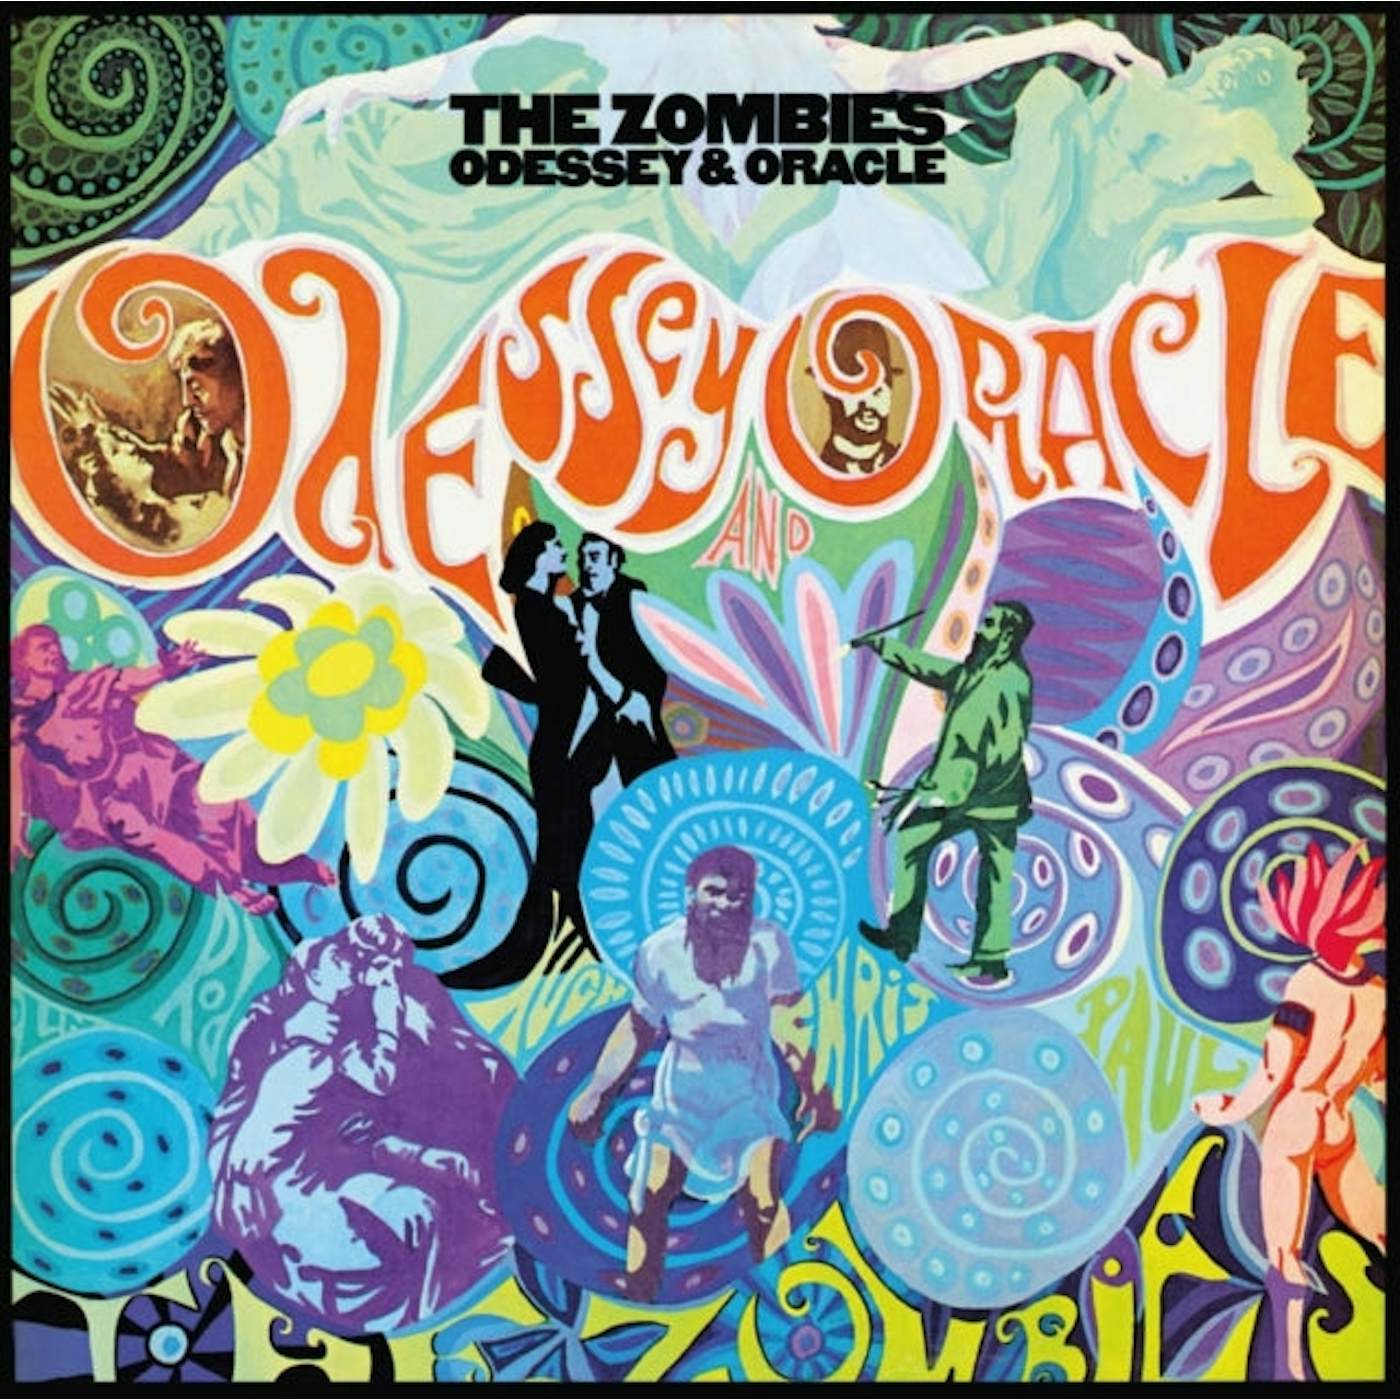 The Zombies LP Vinyl Record - Oddessey & Oracle (Psychedelic Swirl Vinyl) (Rsd Essential)